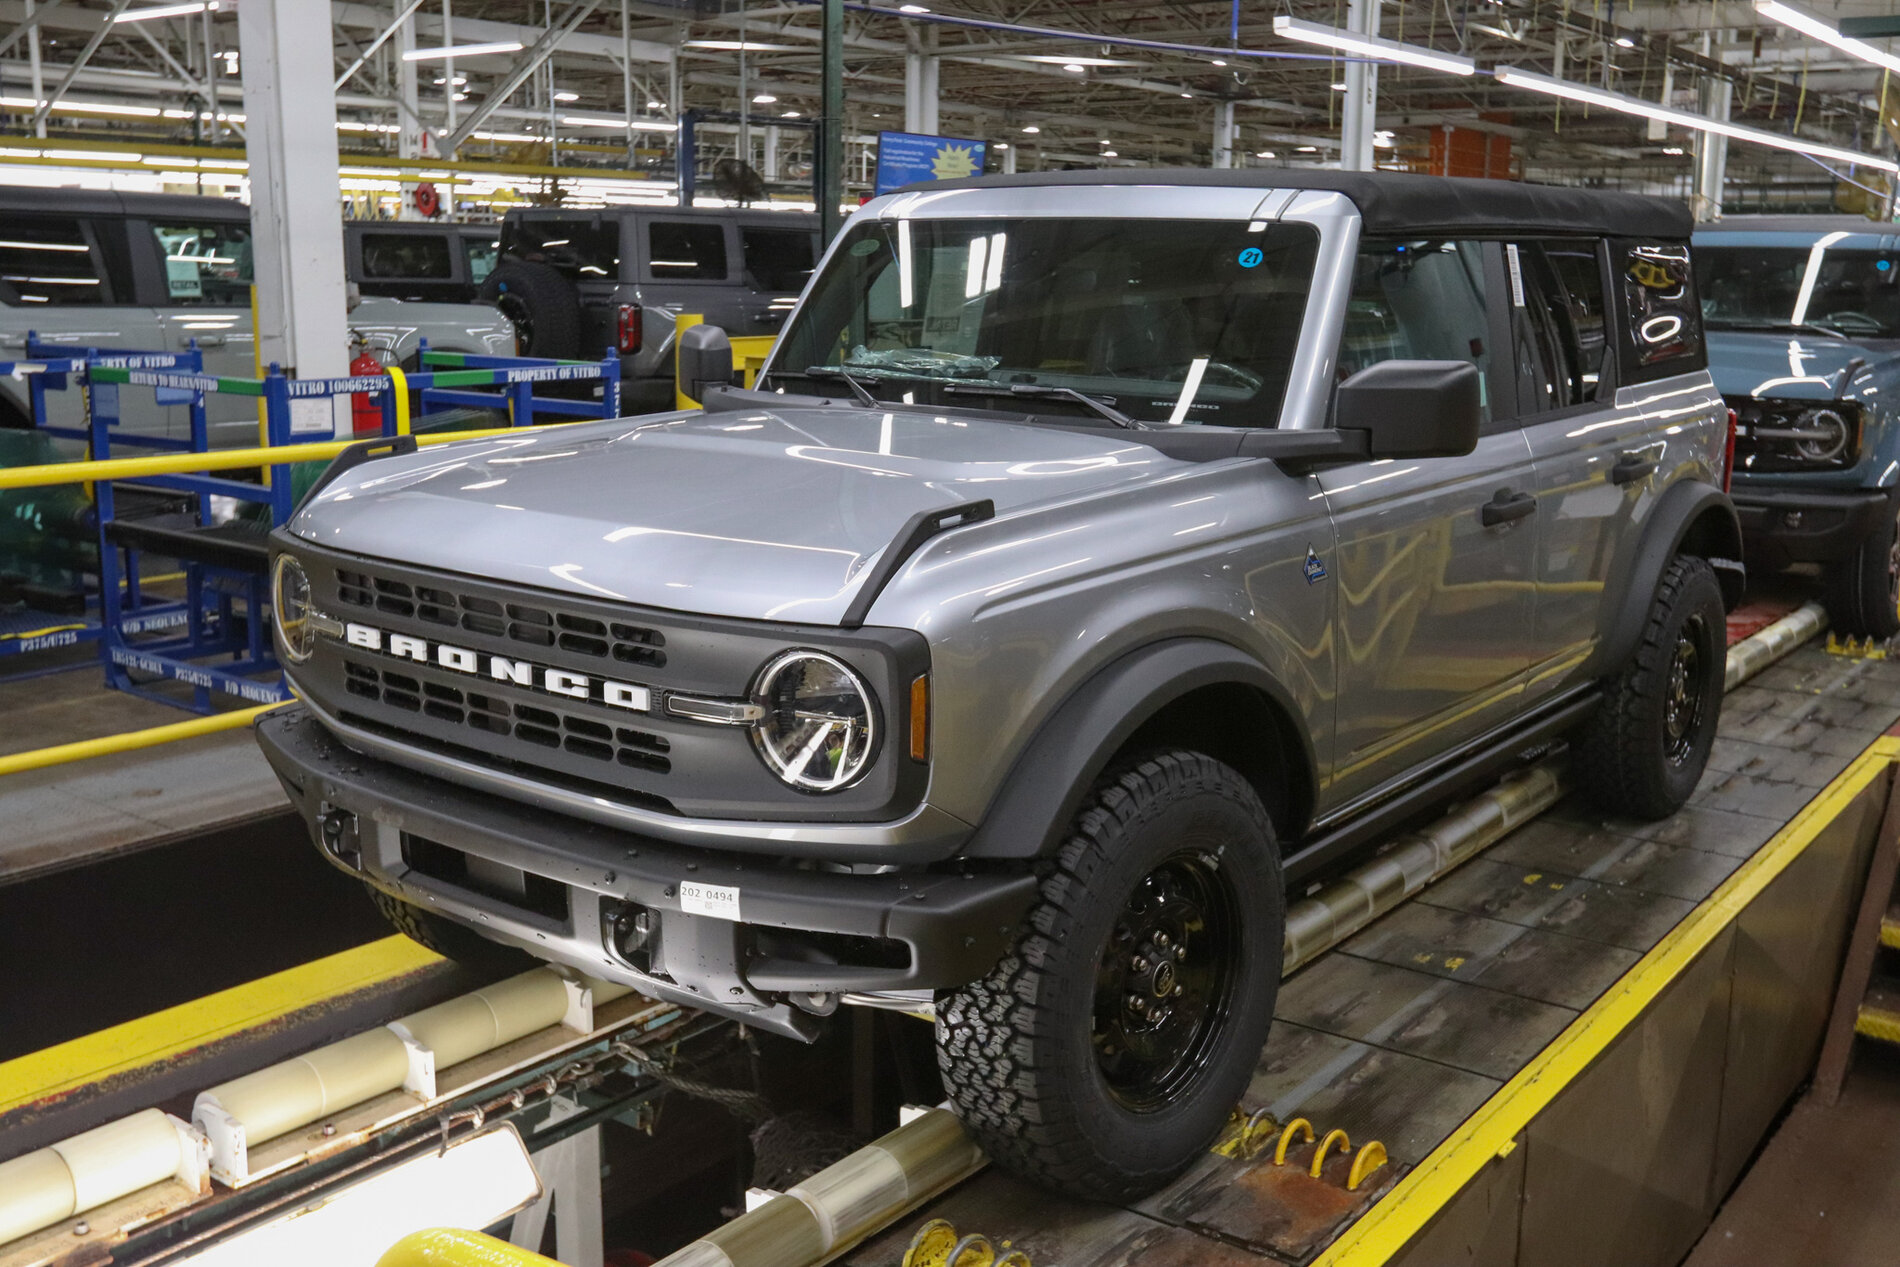 Ford Bronco Post Your Bronco Production Line Pics! (From Ford Emails Starting Today) Bronco assembly